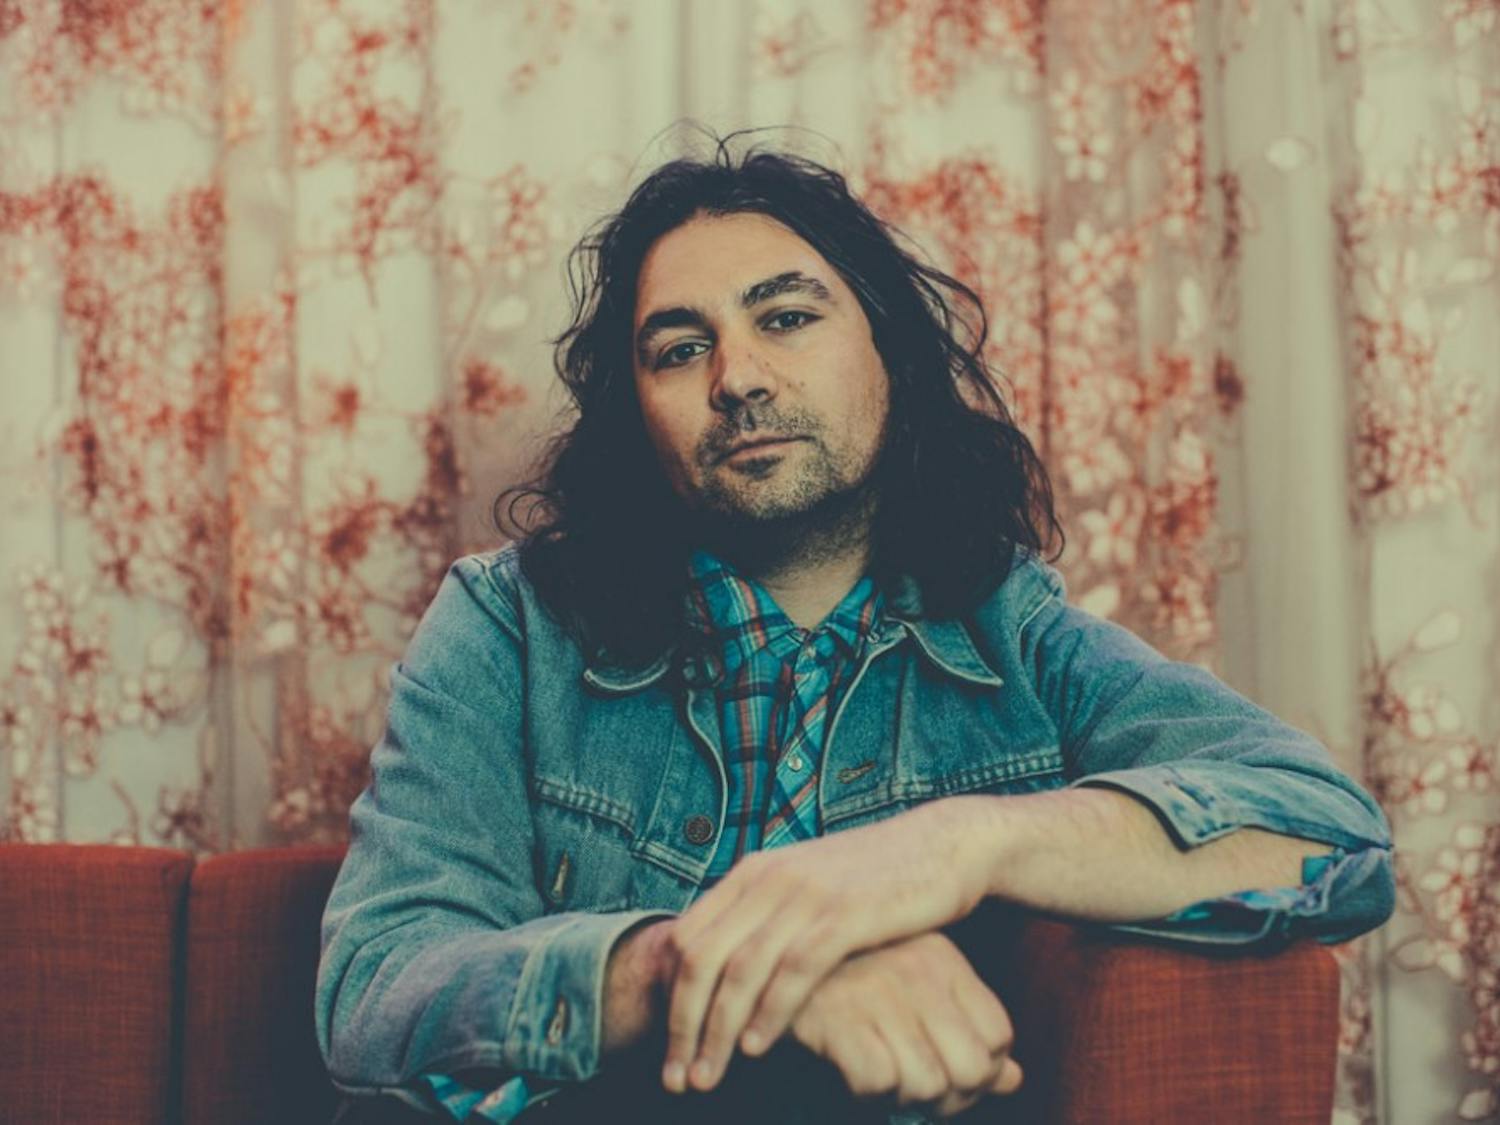 Adam Granduciel and The War on Drugs released "A Deeper Understanding" Aug. 18, following up their 2014 breakthrough "Lost in the Dream."